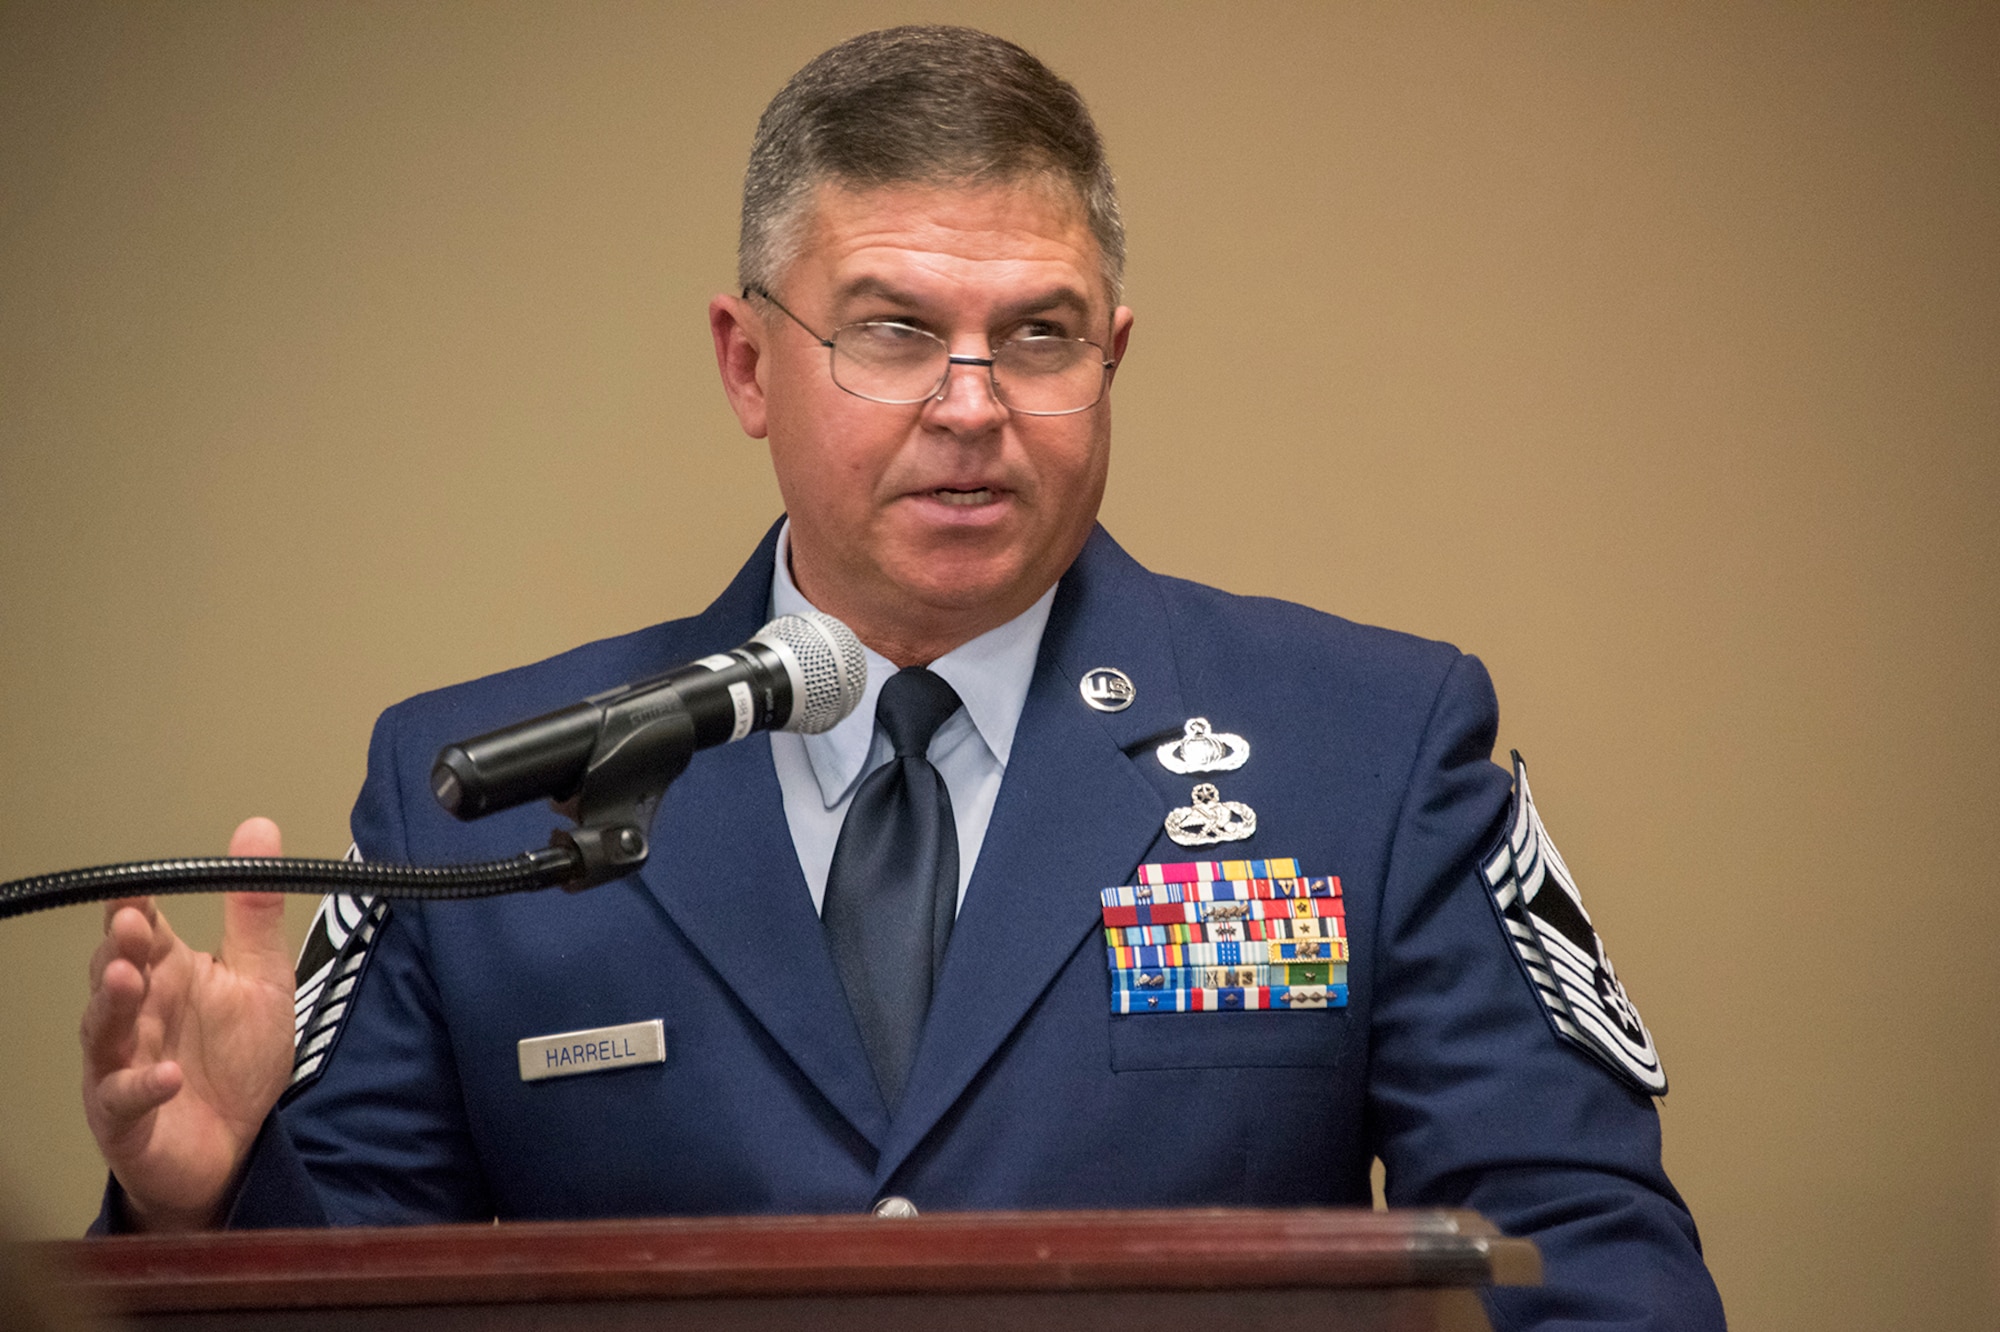 Chief Master Sgt. Nathan E. Harrell, 288th Operations Support Squadron superintendent, addresses Airmen of the 188th Wing during his promotion ceremony at Ebbing Air National Guard Base, Fort Smith, Ark., Feb. 2, 2019. Harrell has over 36 years of military service, and has been a member of the 188th Wing since 1985. (U.S. Air National Guard photo by Staff Sgt. Emmanuel Gutierrez)